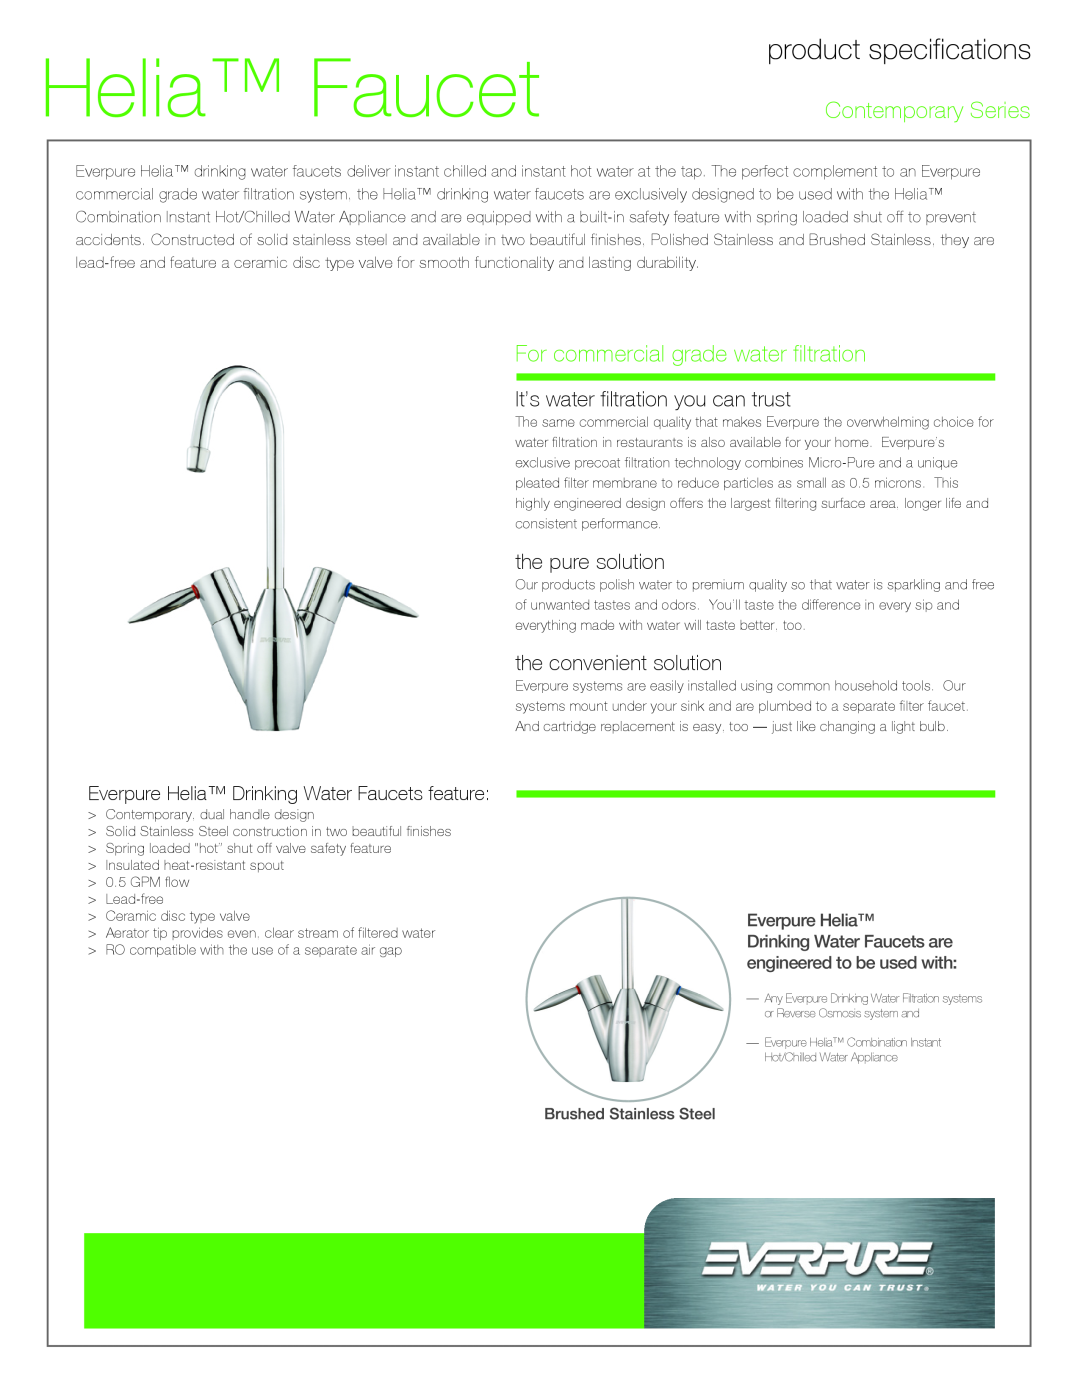 Everpure EV9008-21 manual Helia Faucet, Contemporary Series, For commercial grade water filtration, the pure solution 